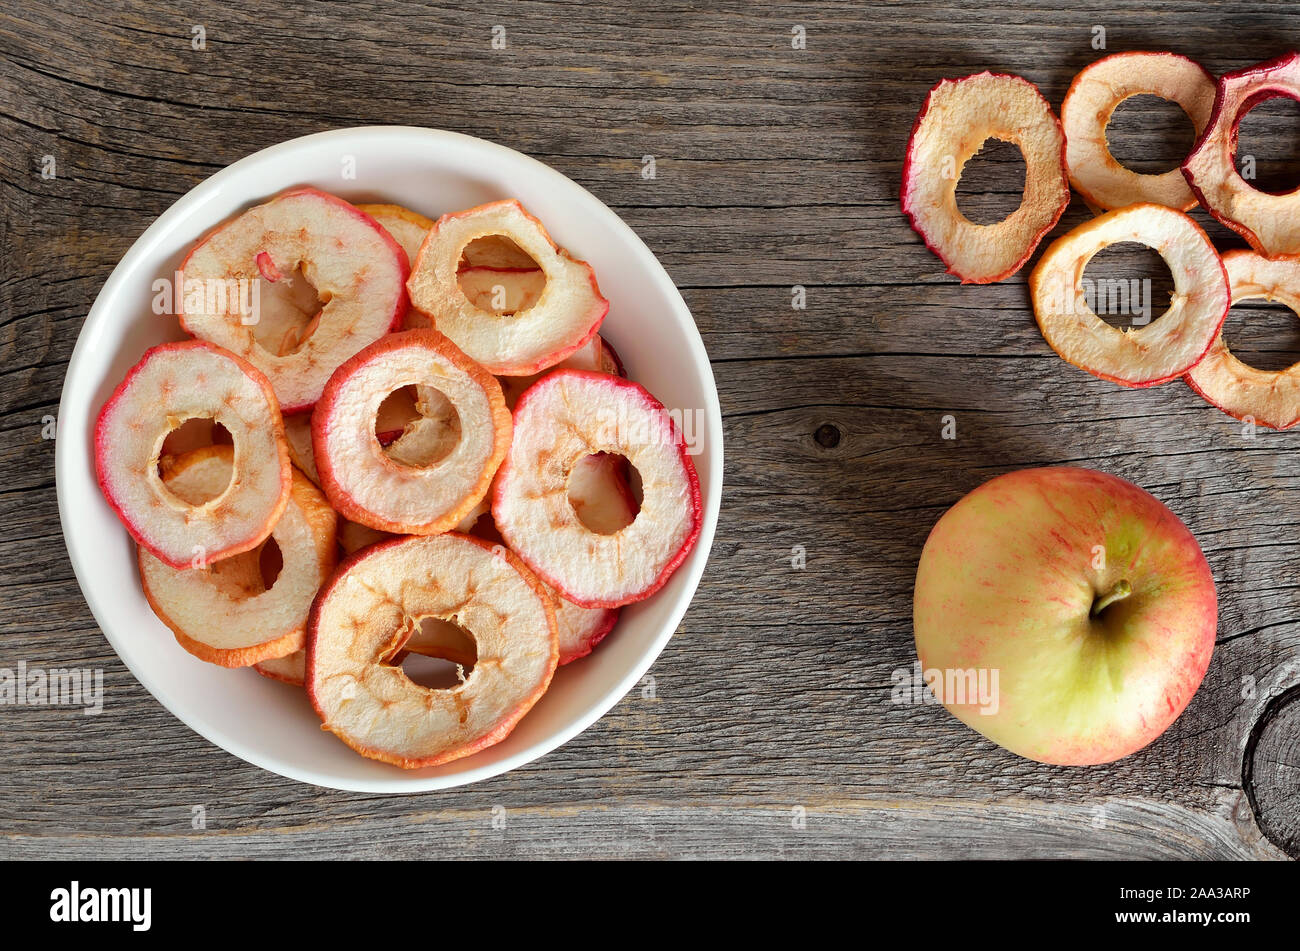 Dehydrated apples chips in wooden bowl on a wooden table, top view Stock Photo